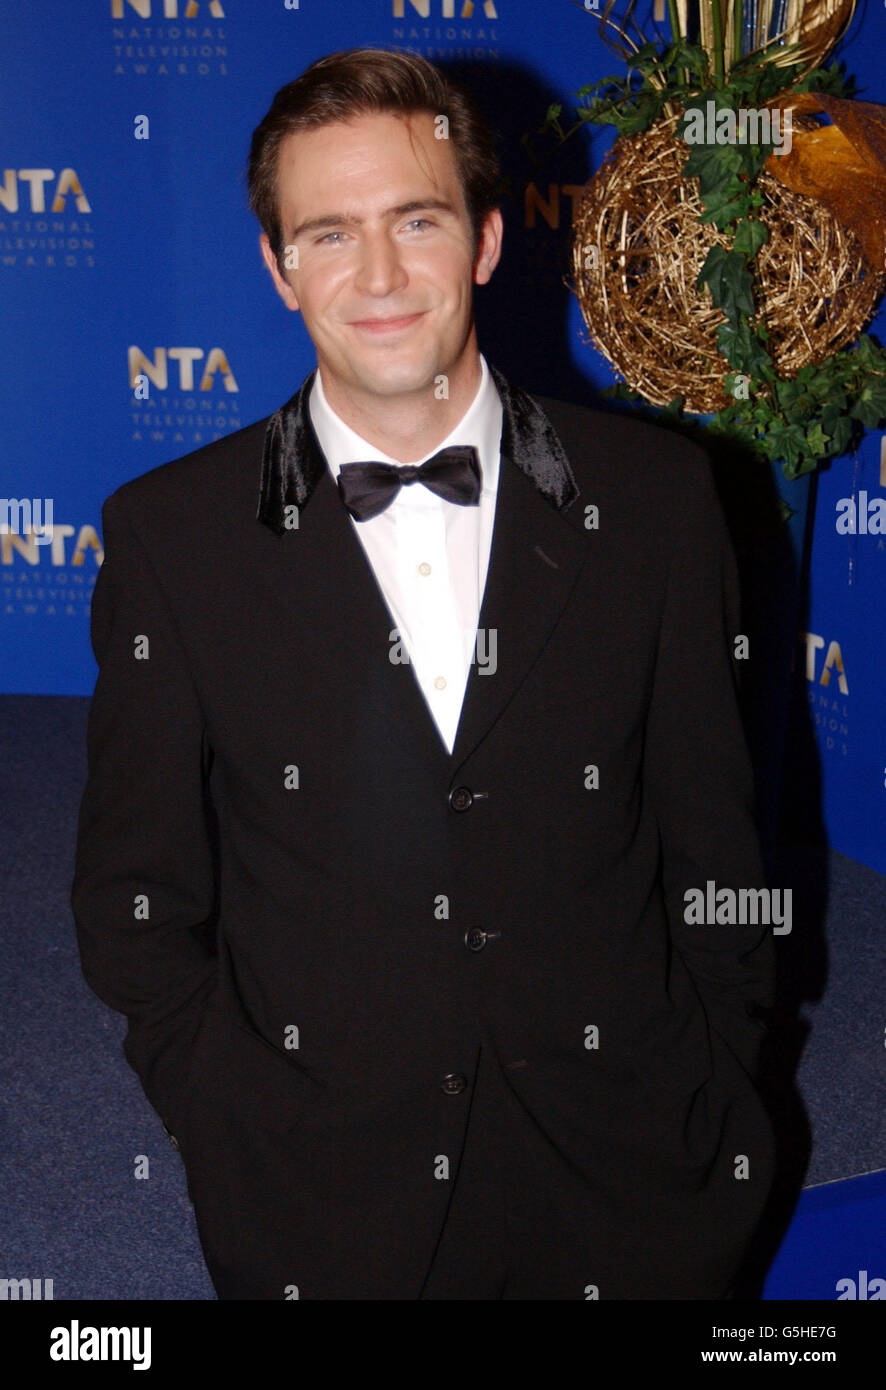 Actor Jack Davenport at the National Television Awards at the Royal Albert Hall in London. Stock Photo